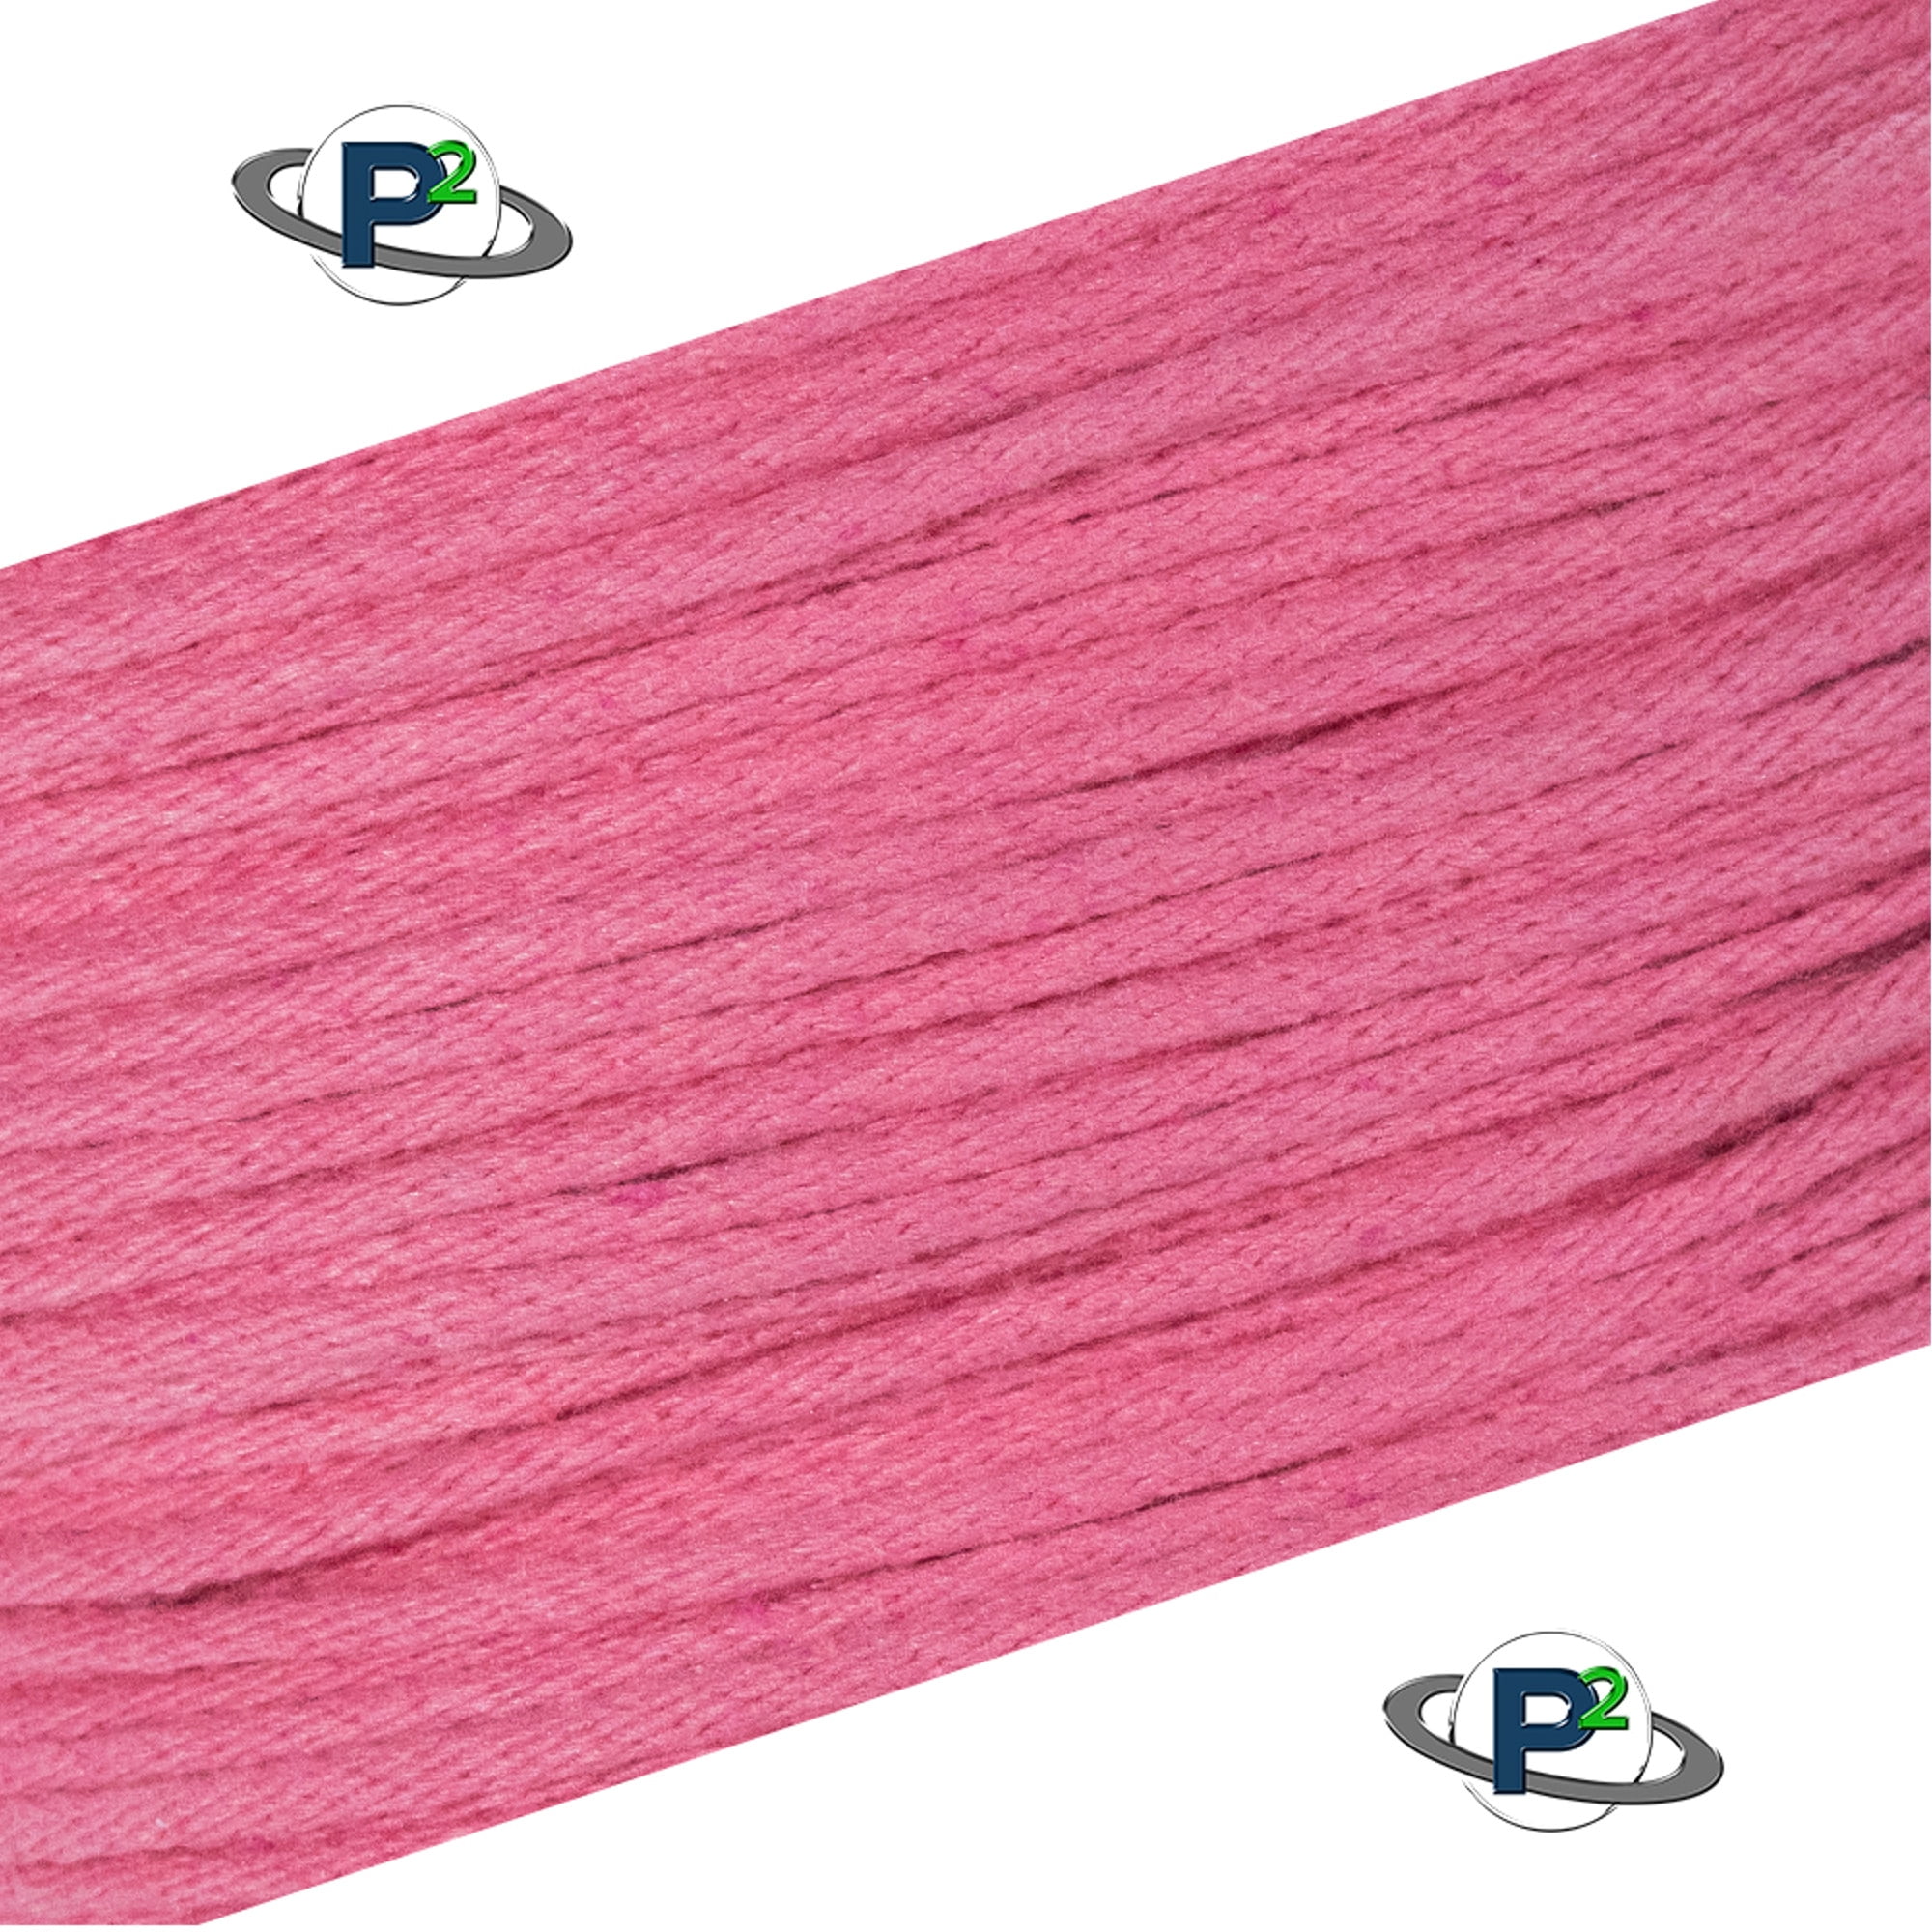 Pack of 3 5/16" x 20' Red Kid's Rope E374 